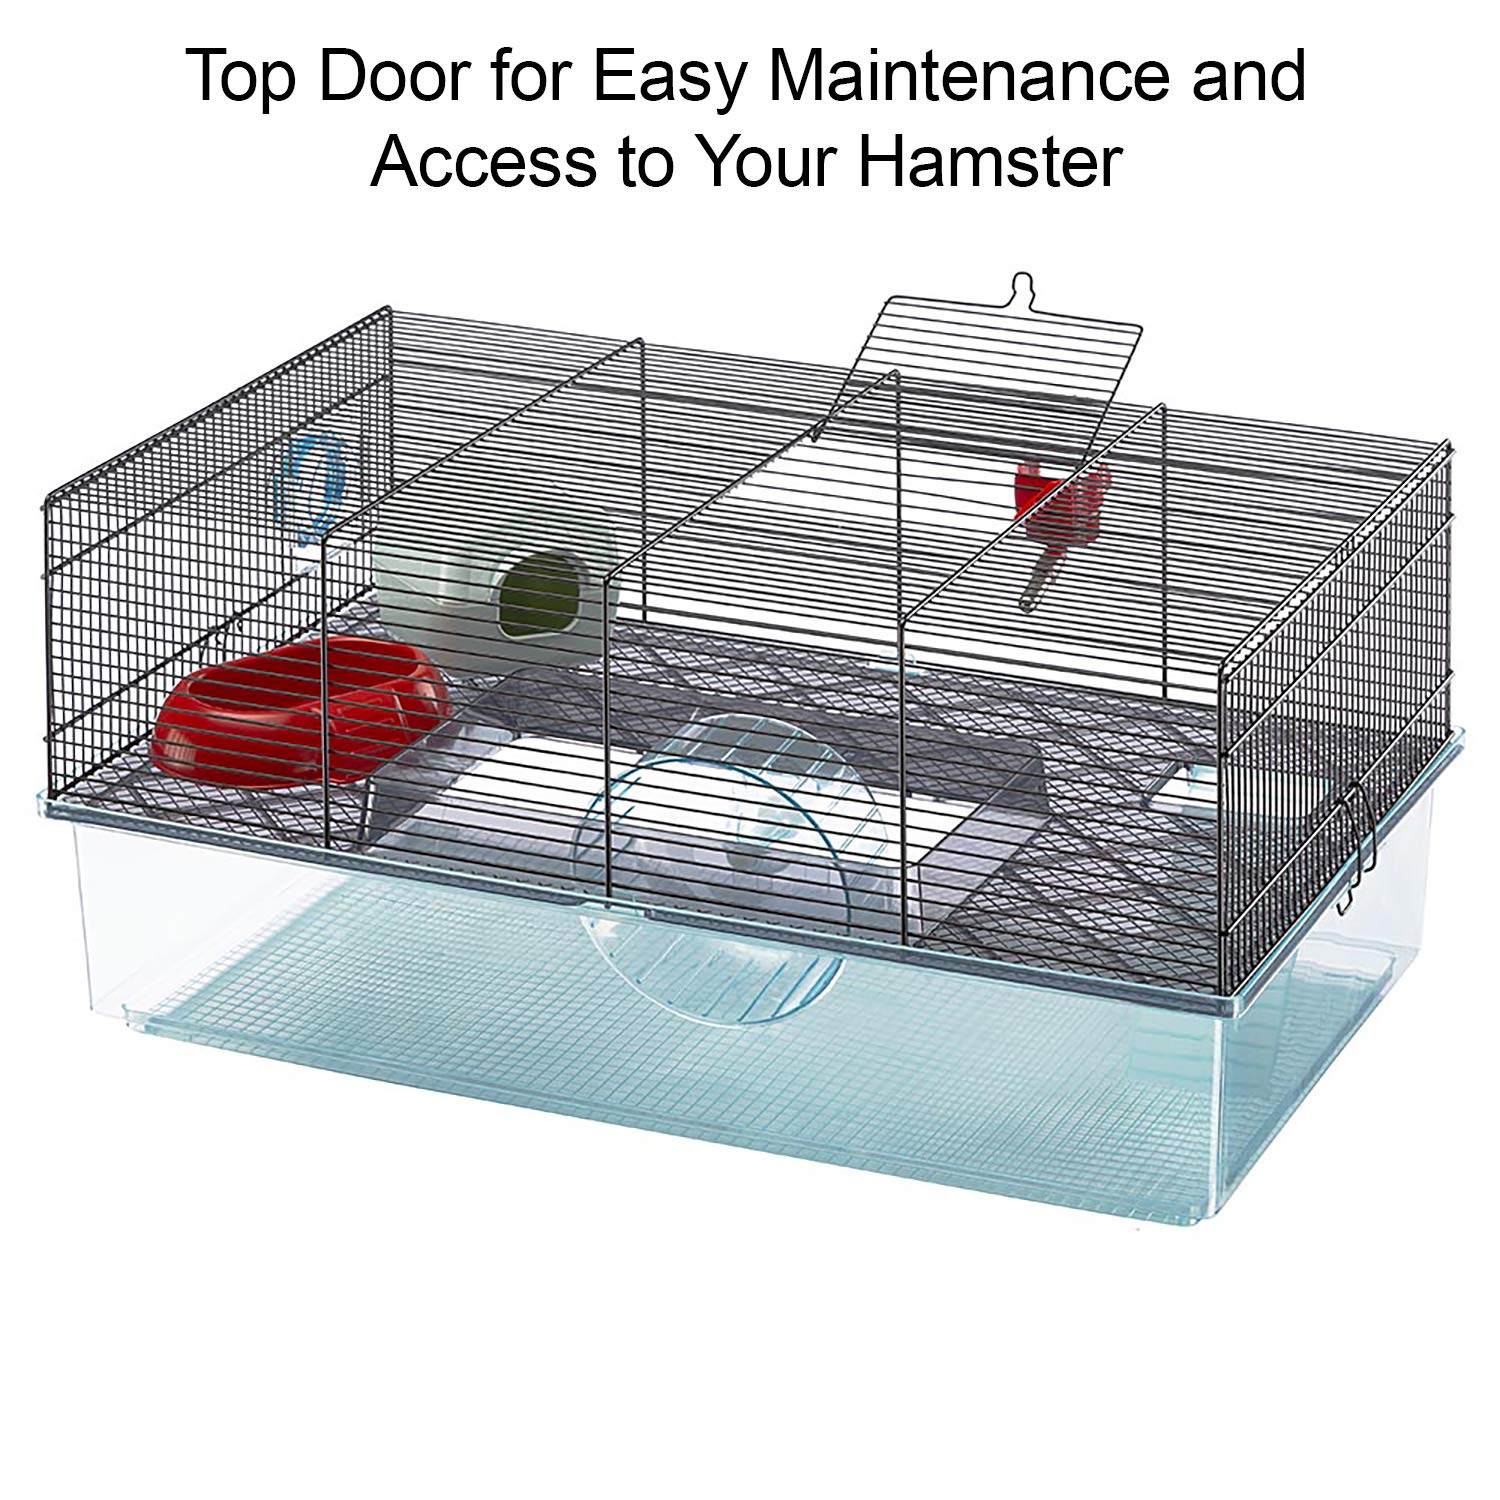 Ferplast Favola Multi-Level Hamster Cage with Bottle and Dish - Black - 23.6" X 14.4" X 11.8" Inches  